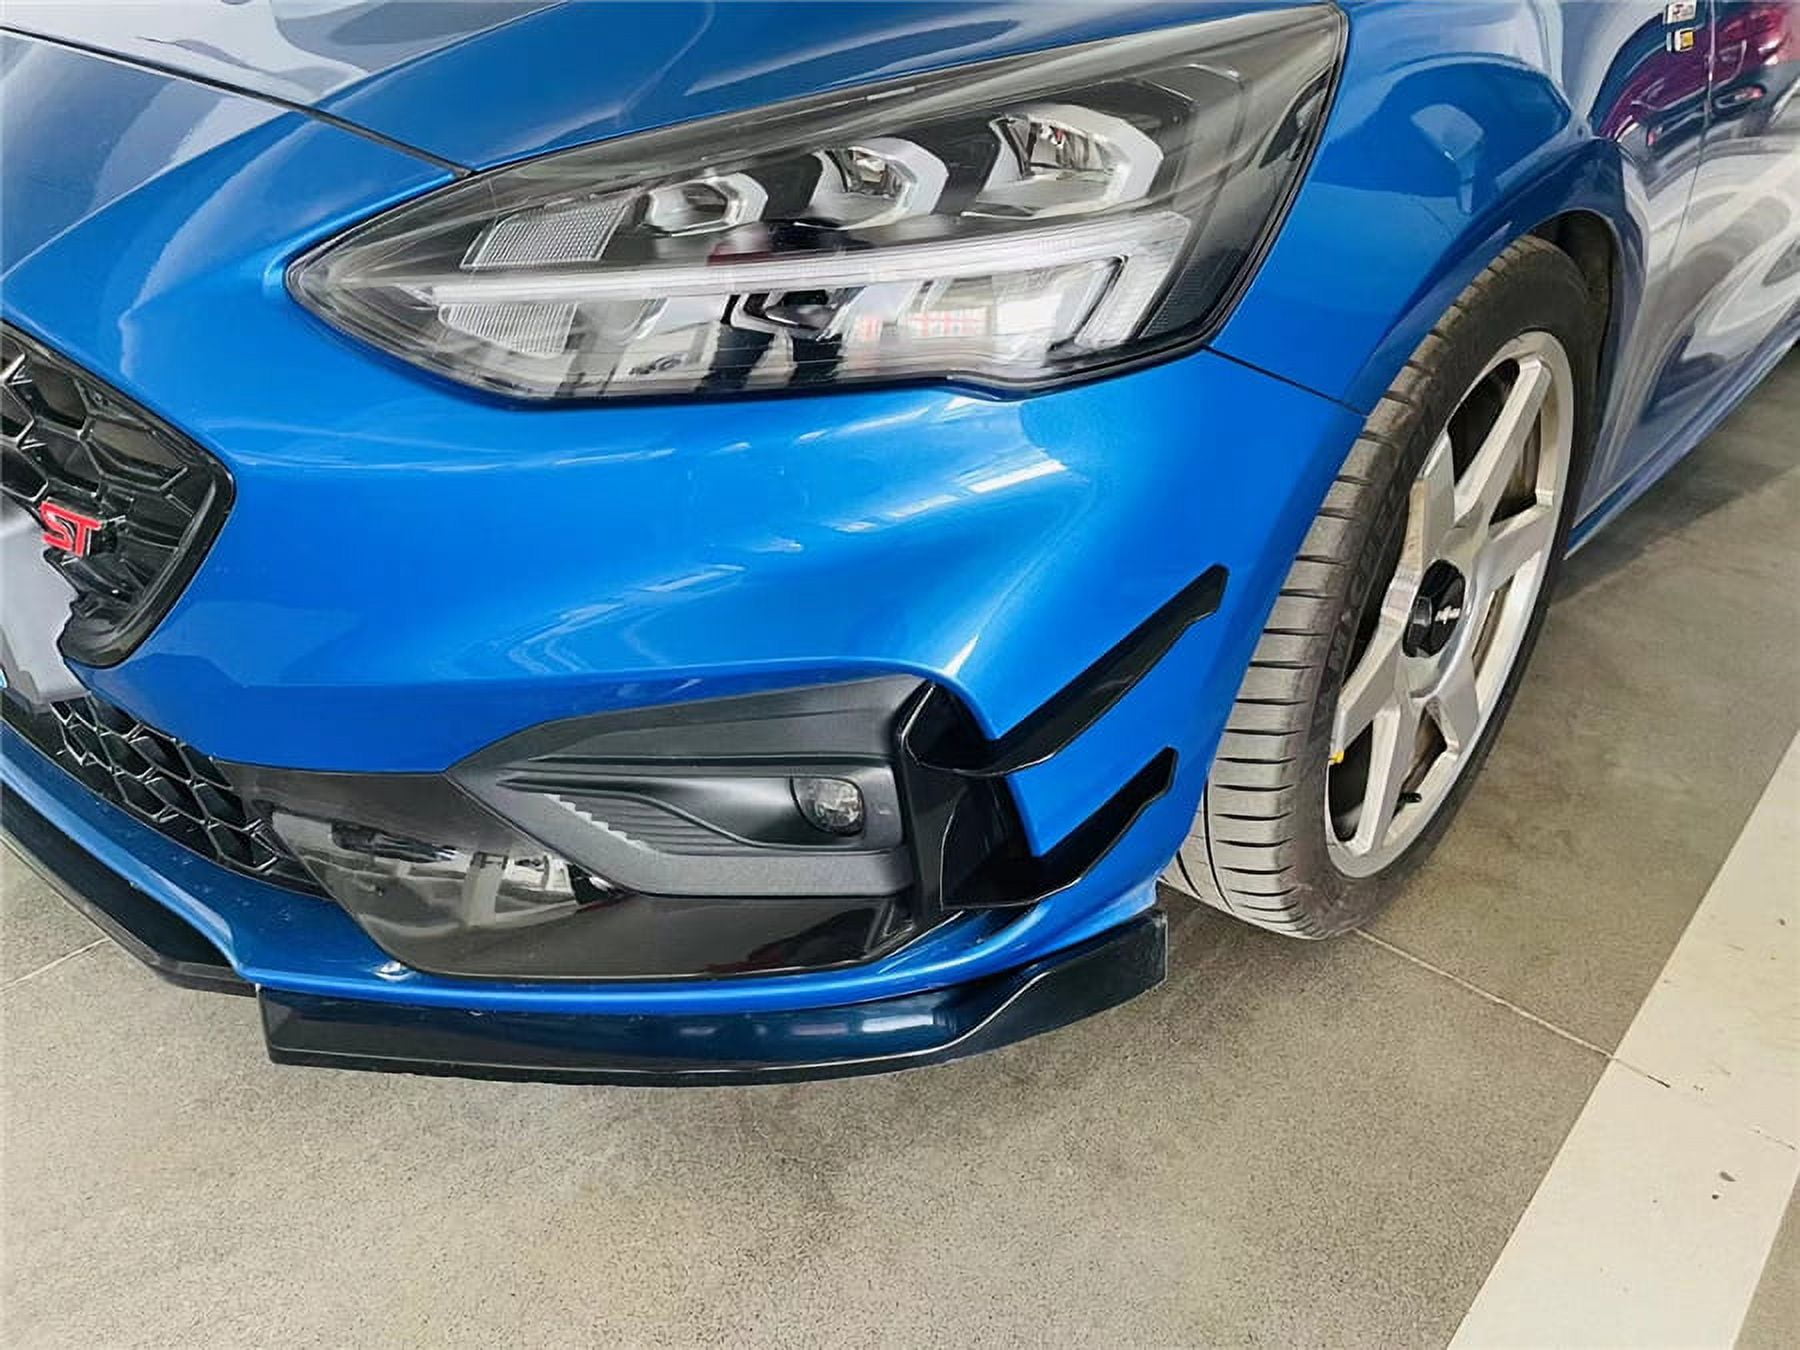 4x Front Bumper Splitter Canard Blade Wing Trim For Ford Focus ST